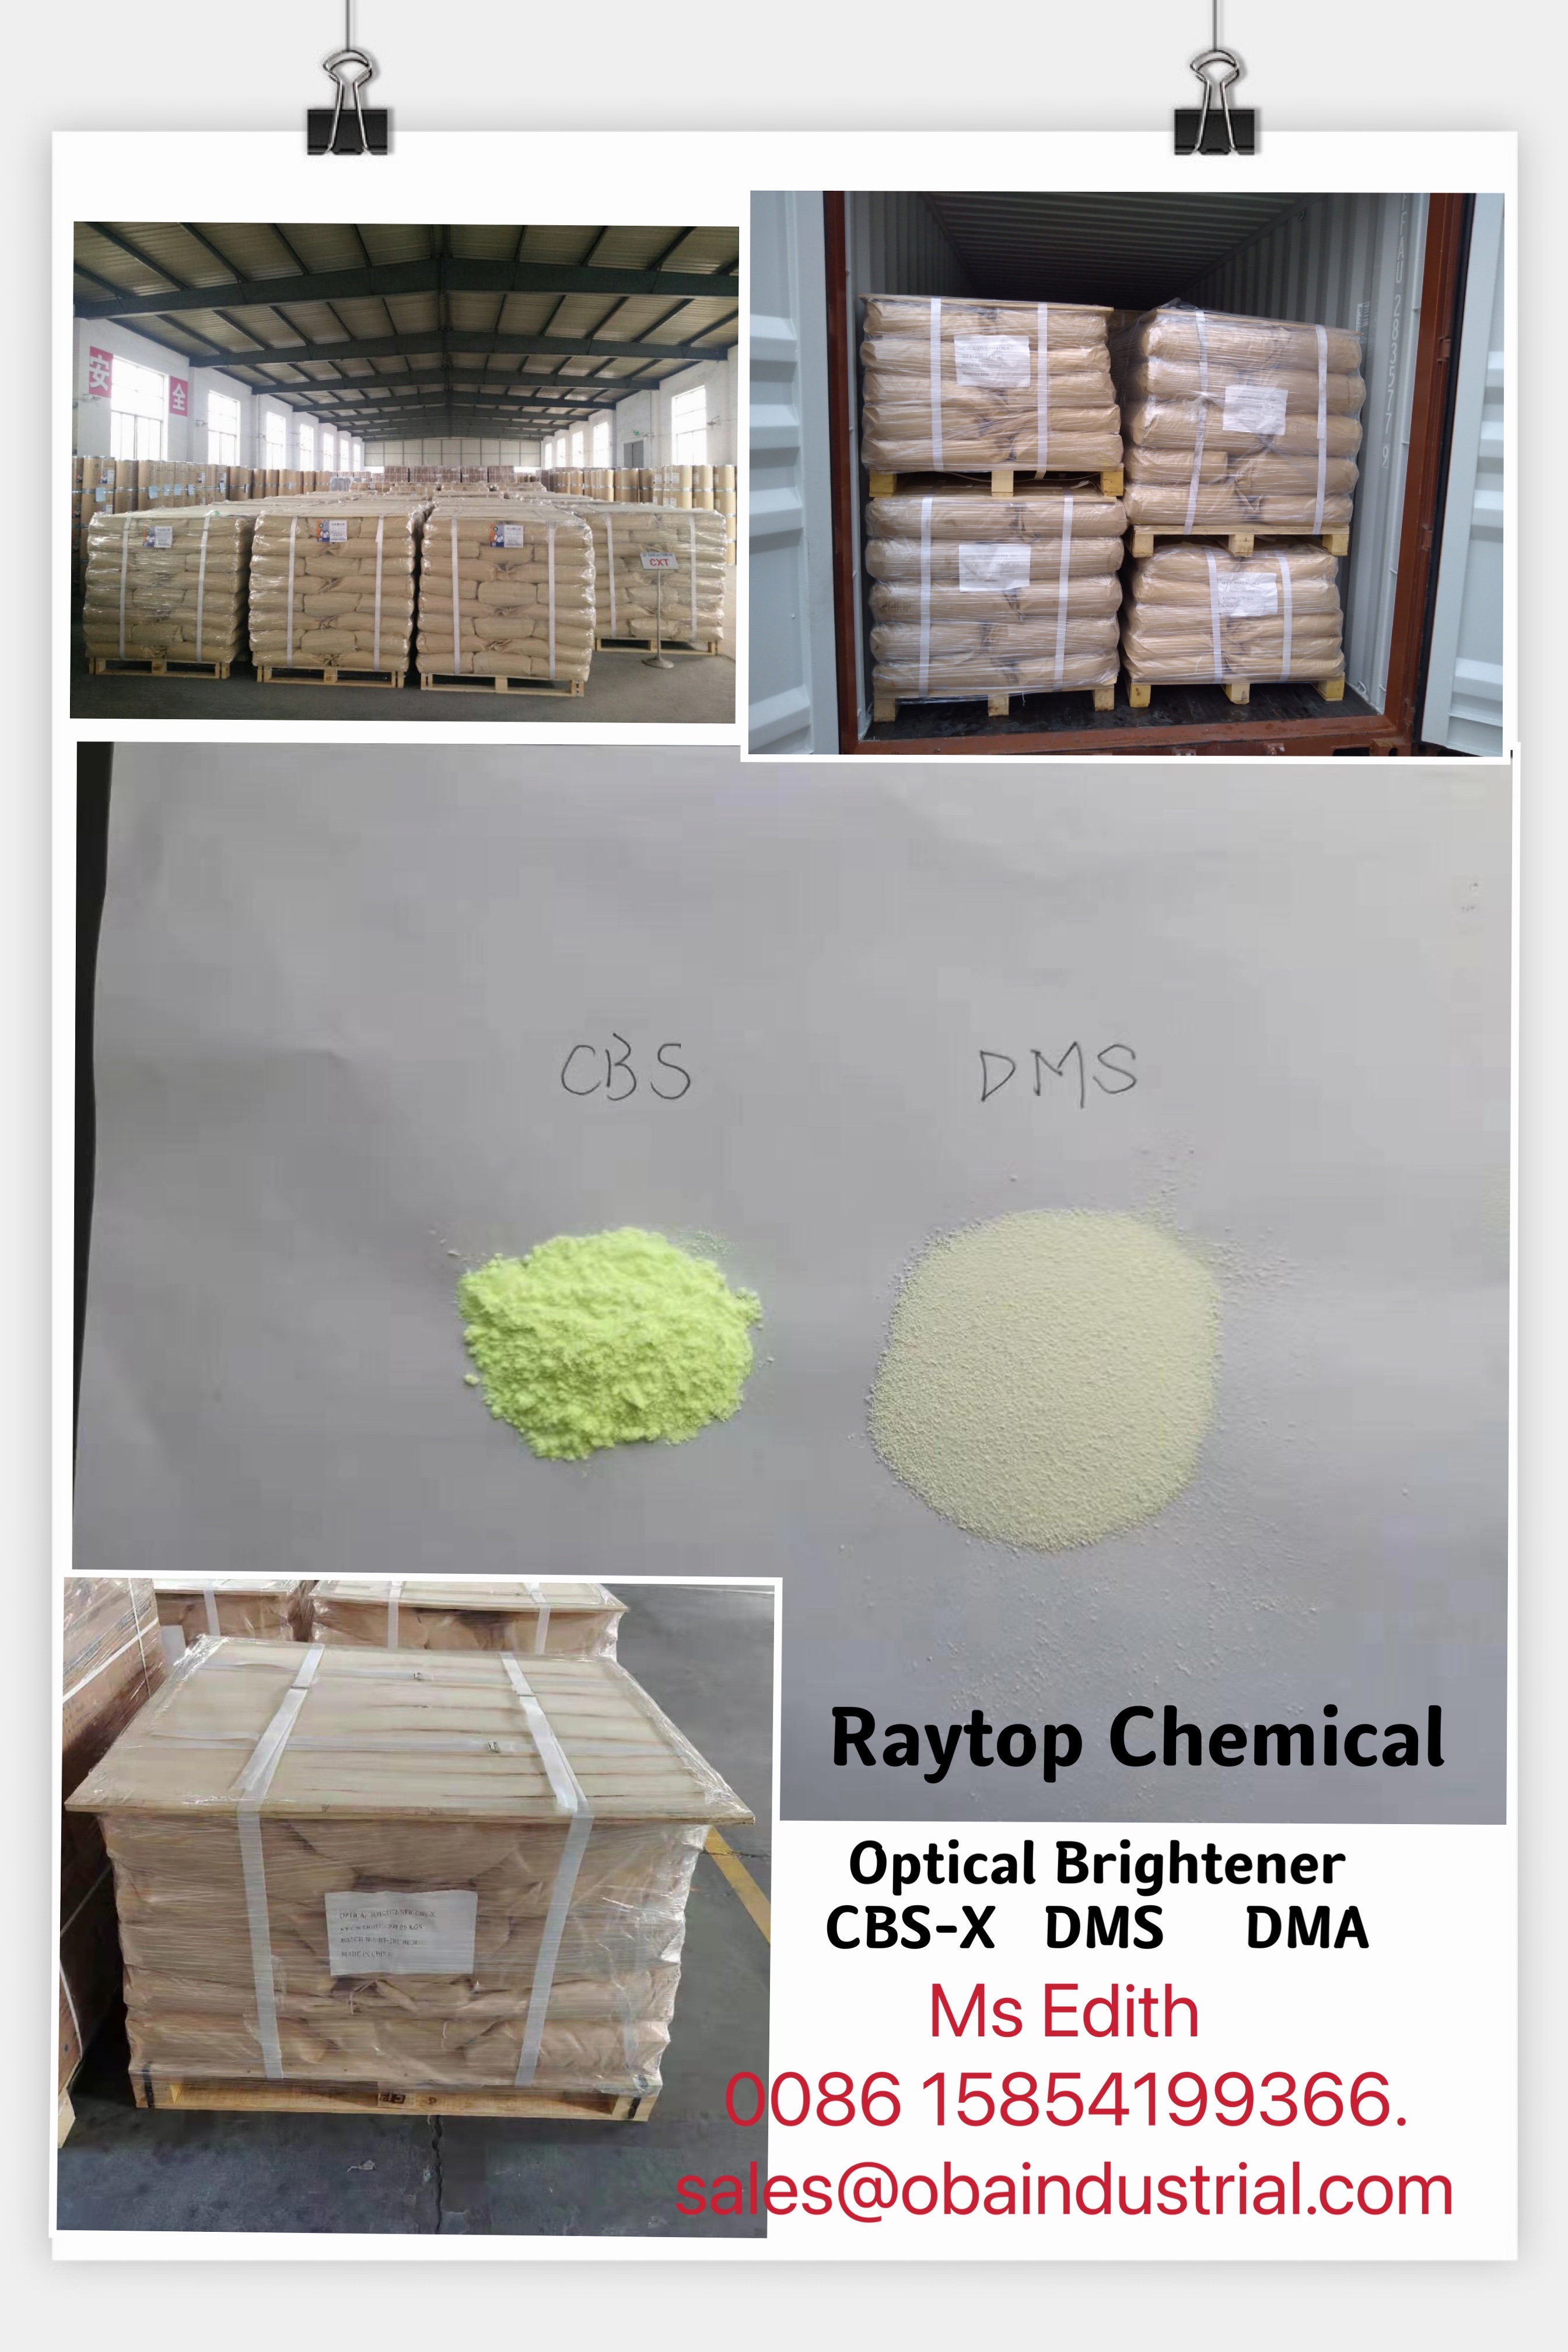 Optical brightener FB CBS-X 351 for detergent in South Africa